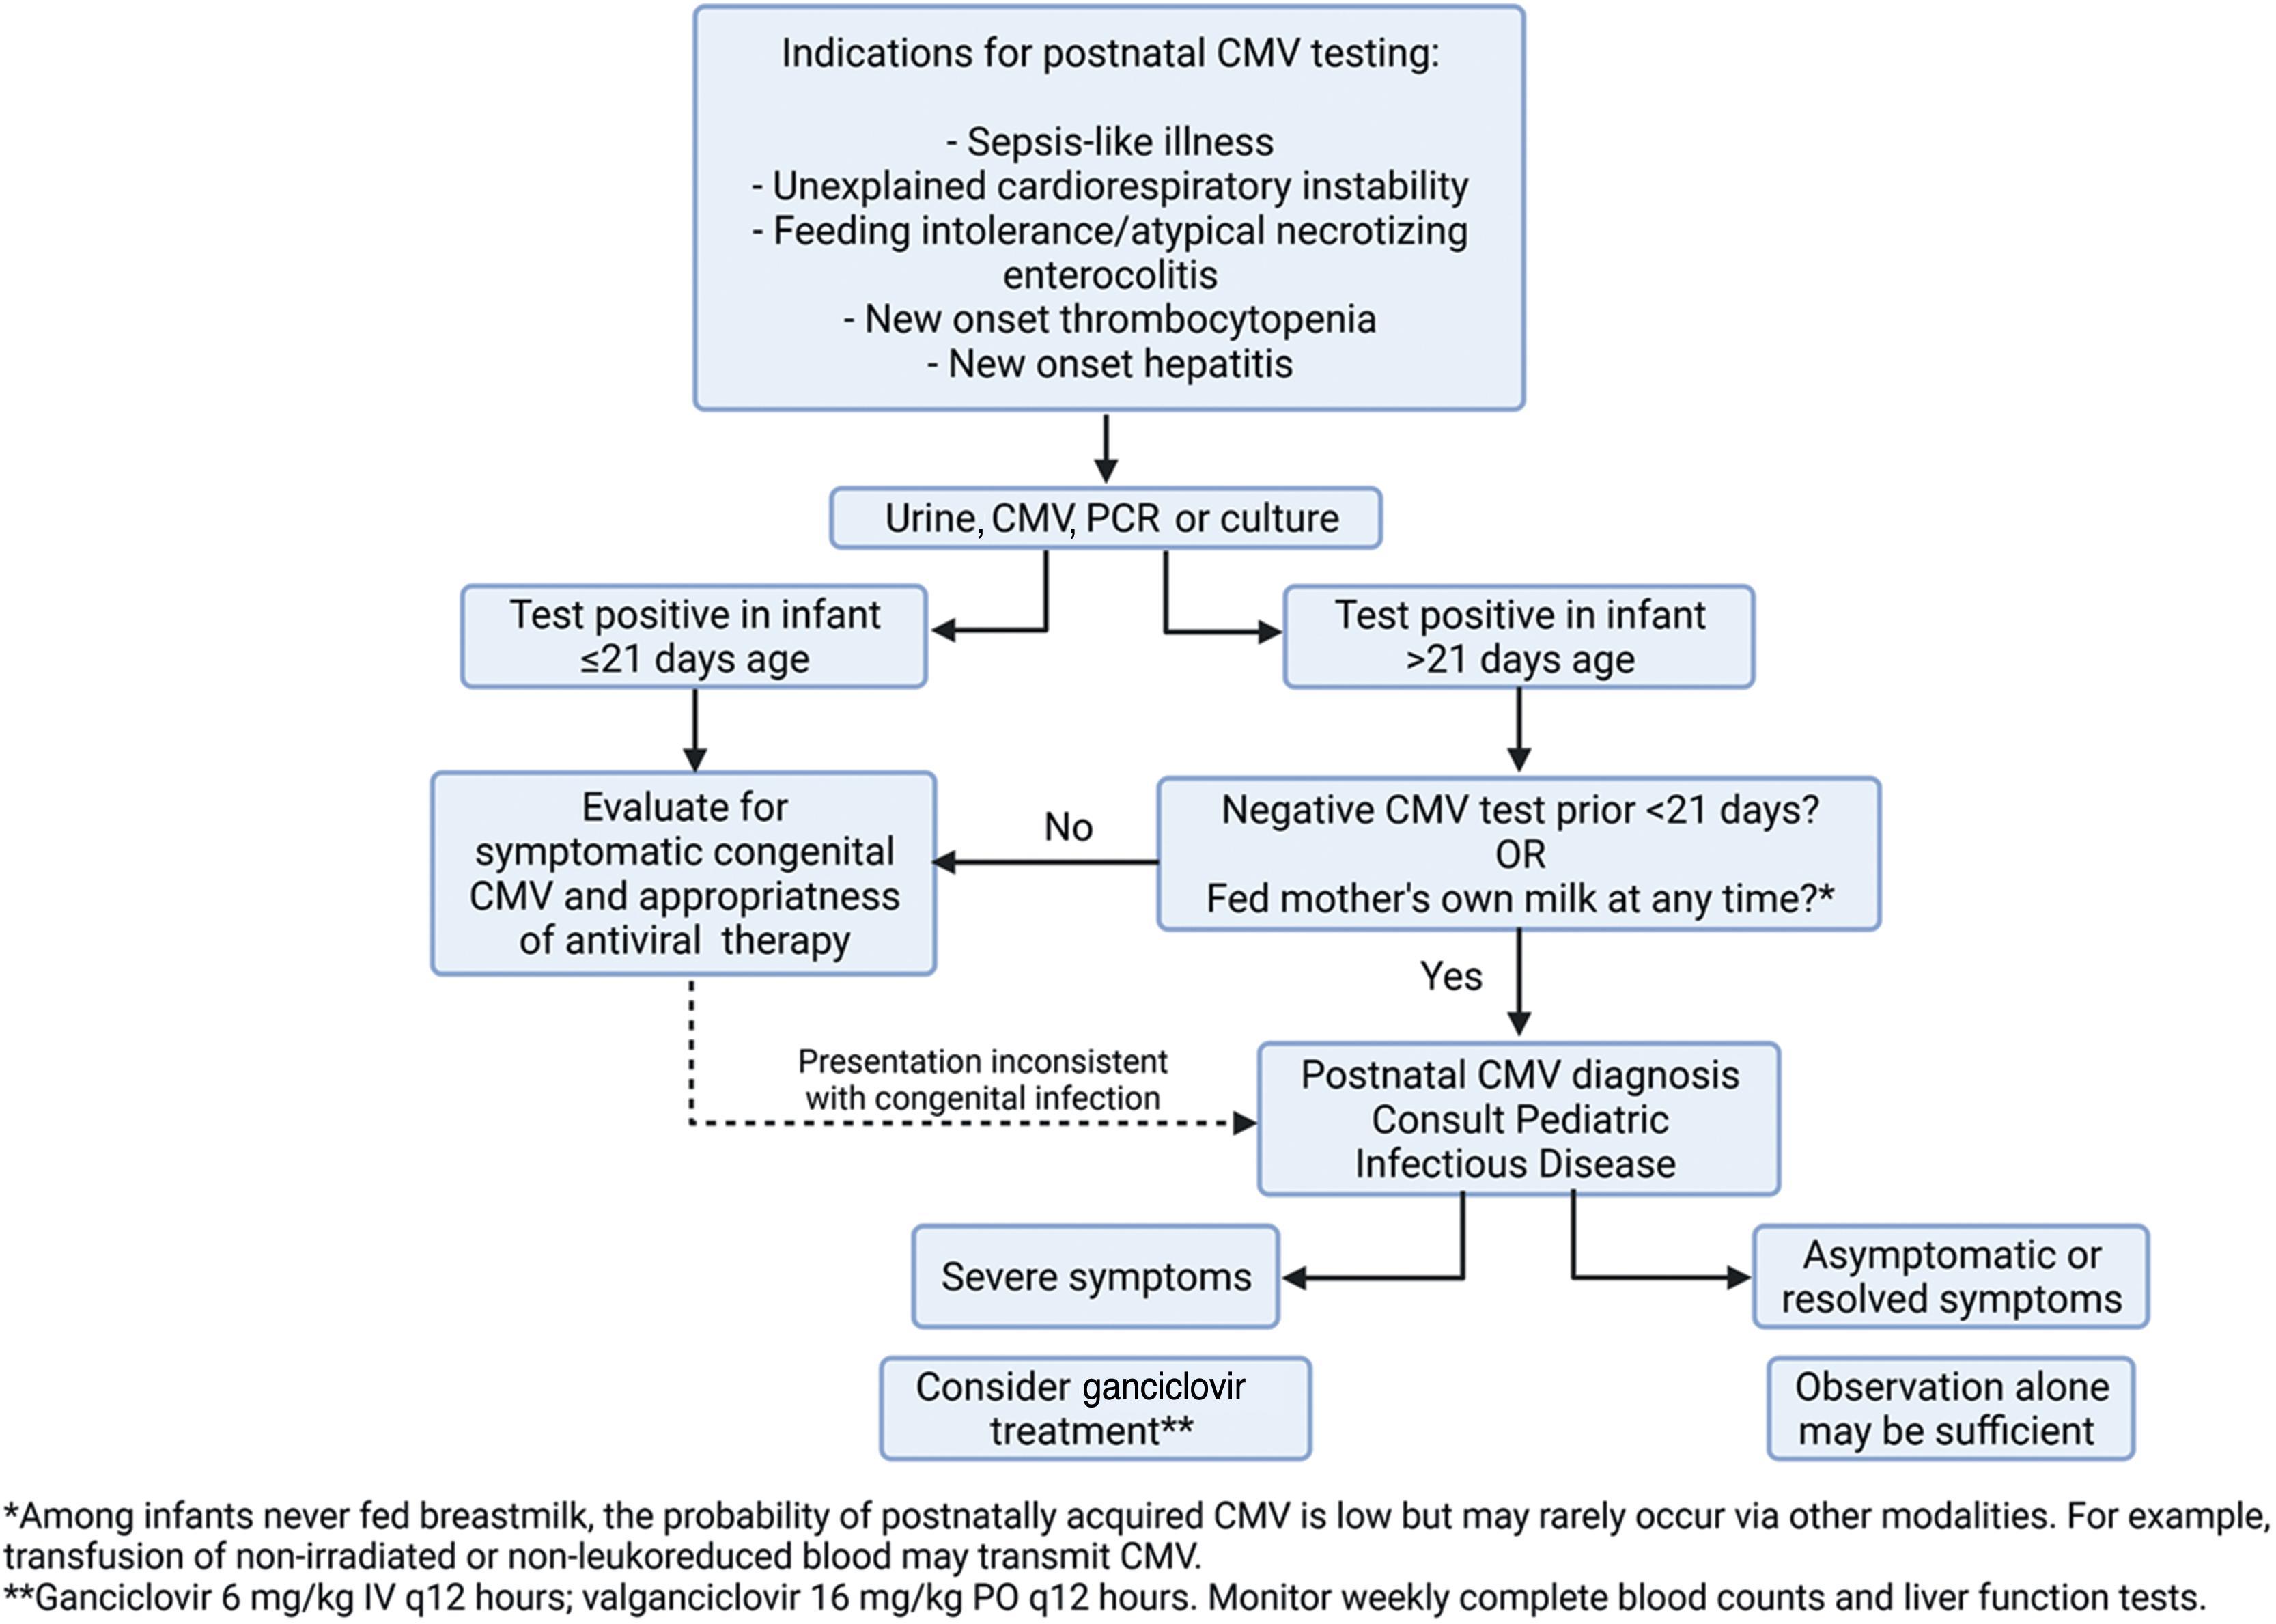 Fig. 33.2, Approach to pCMV Diagnosis and Management.